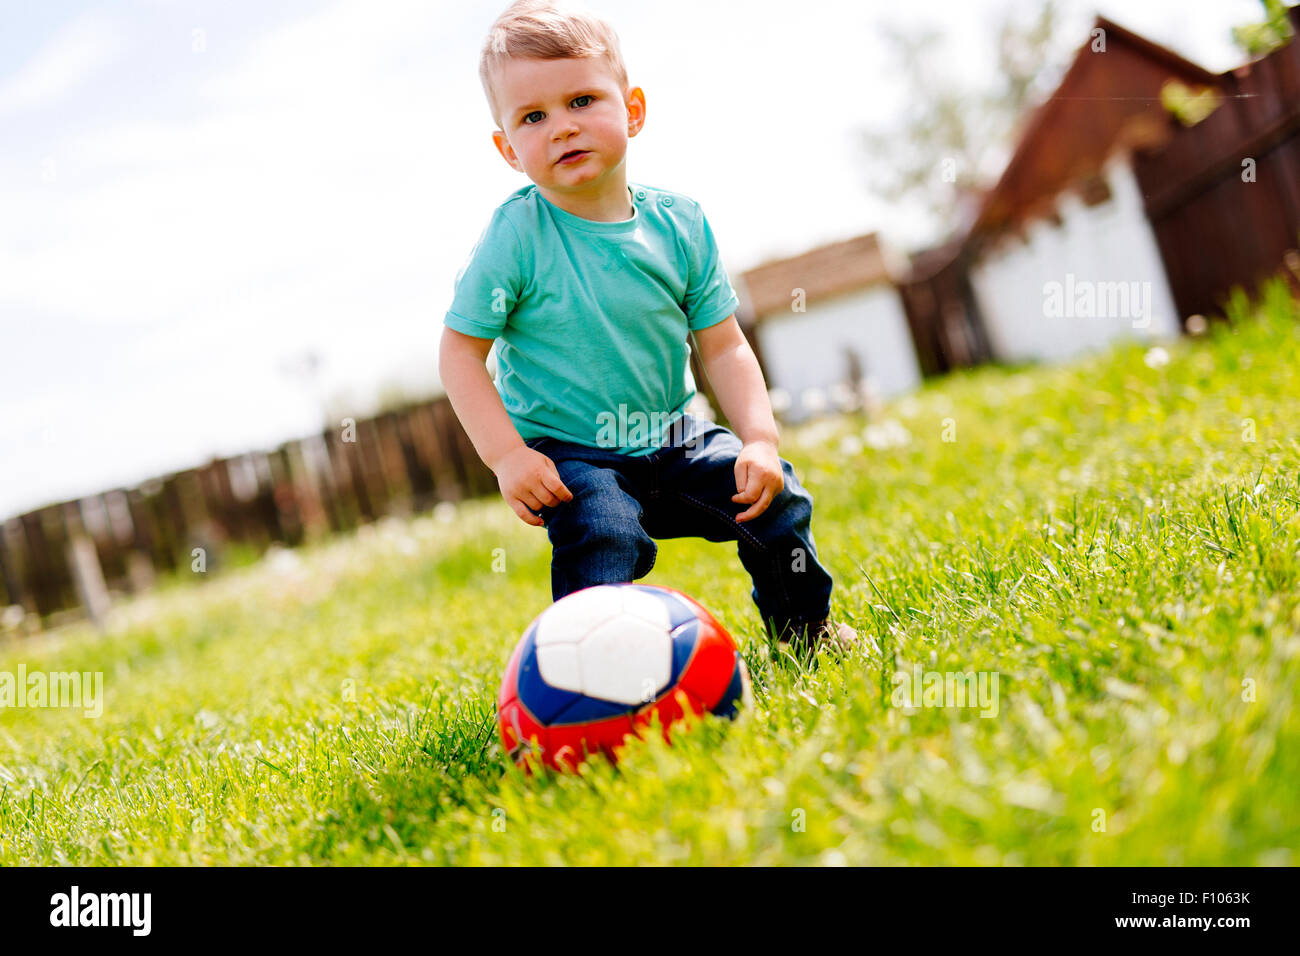 Adorable Small Boy Playing With A Soccer Ball Outdoors Stock Photo Alamy